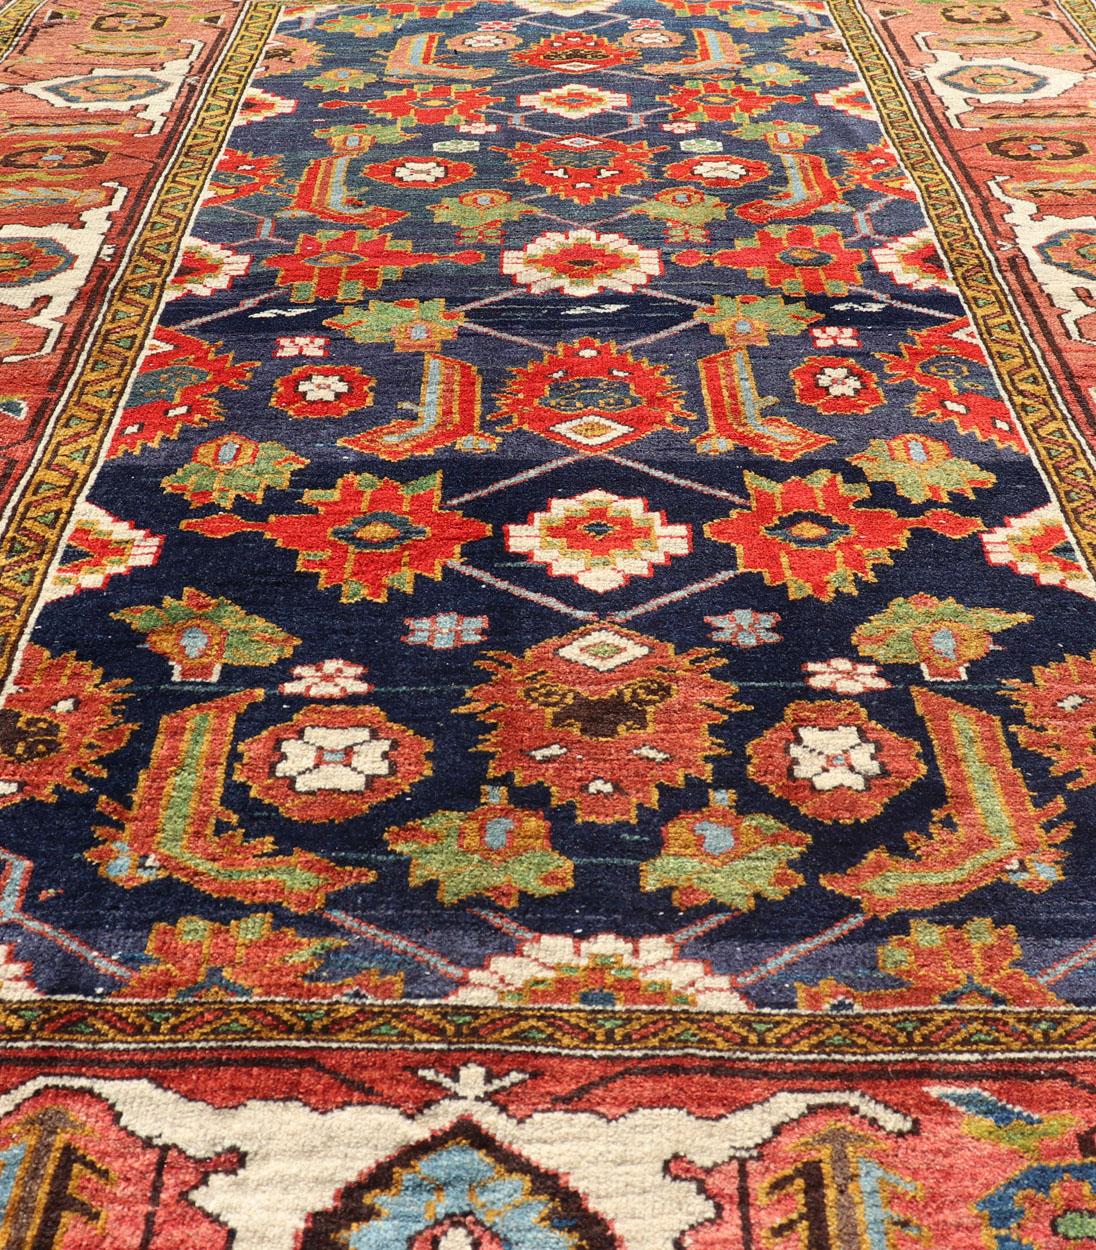 Hand-Knotted Antique Caucasian Rug with All-Over Design in Royal Blue Field, Soft Red & Green For Sale